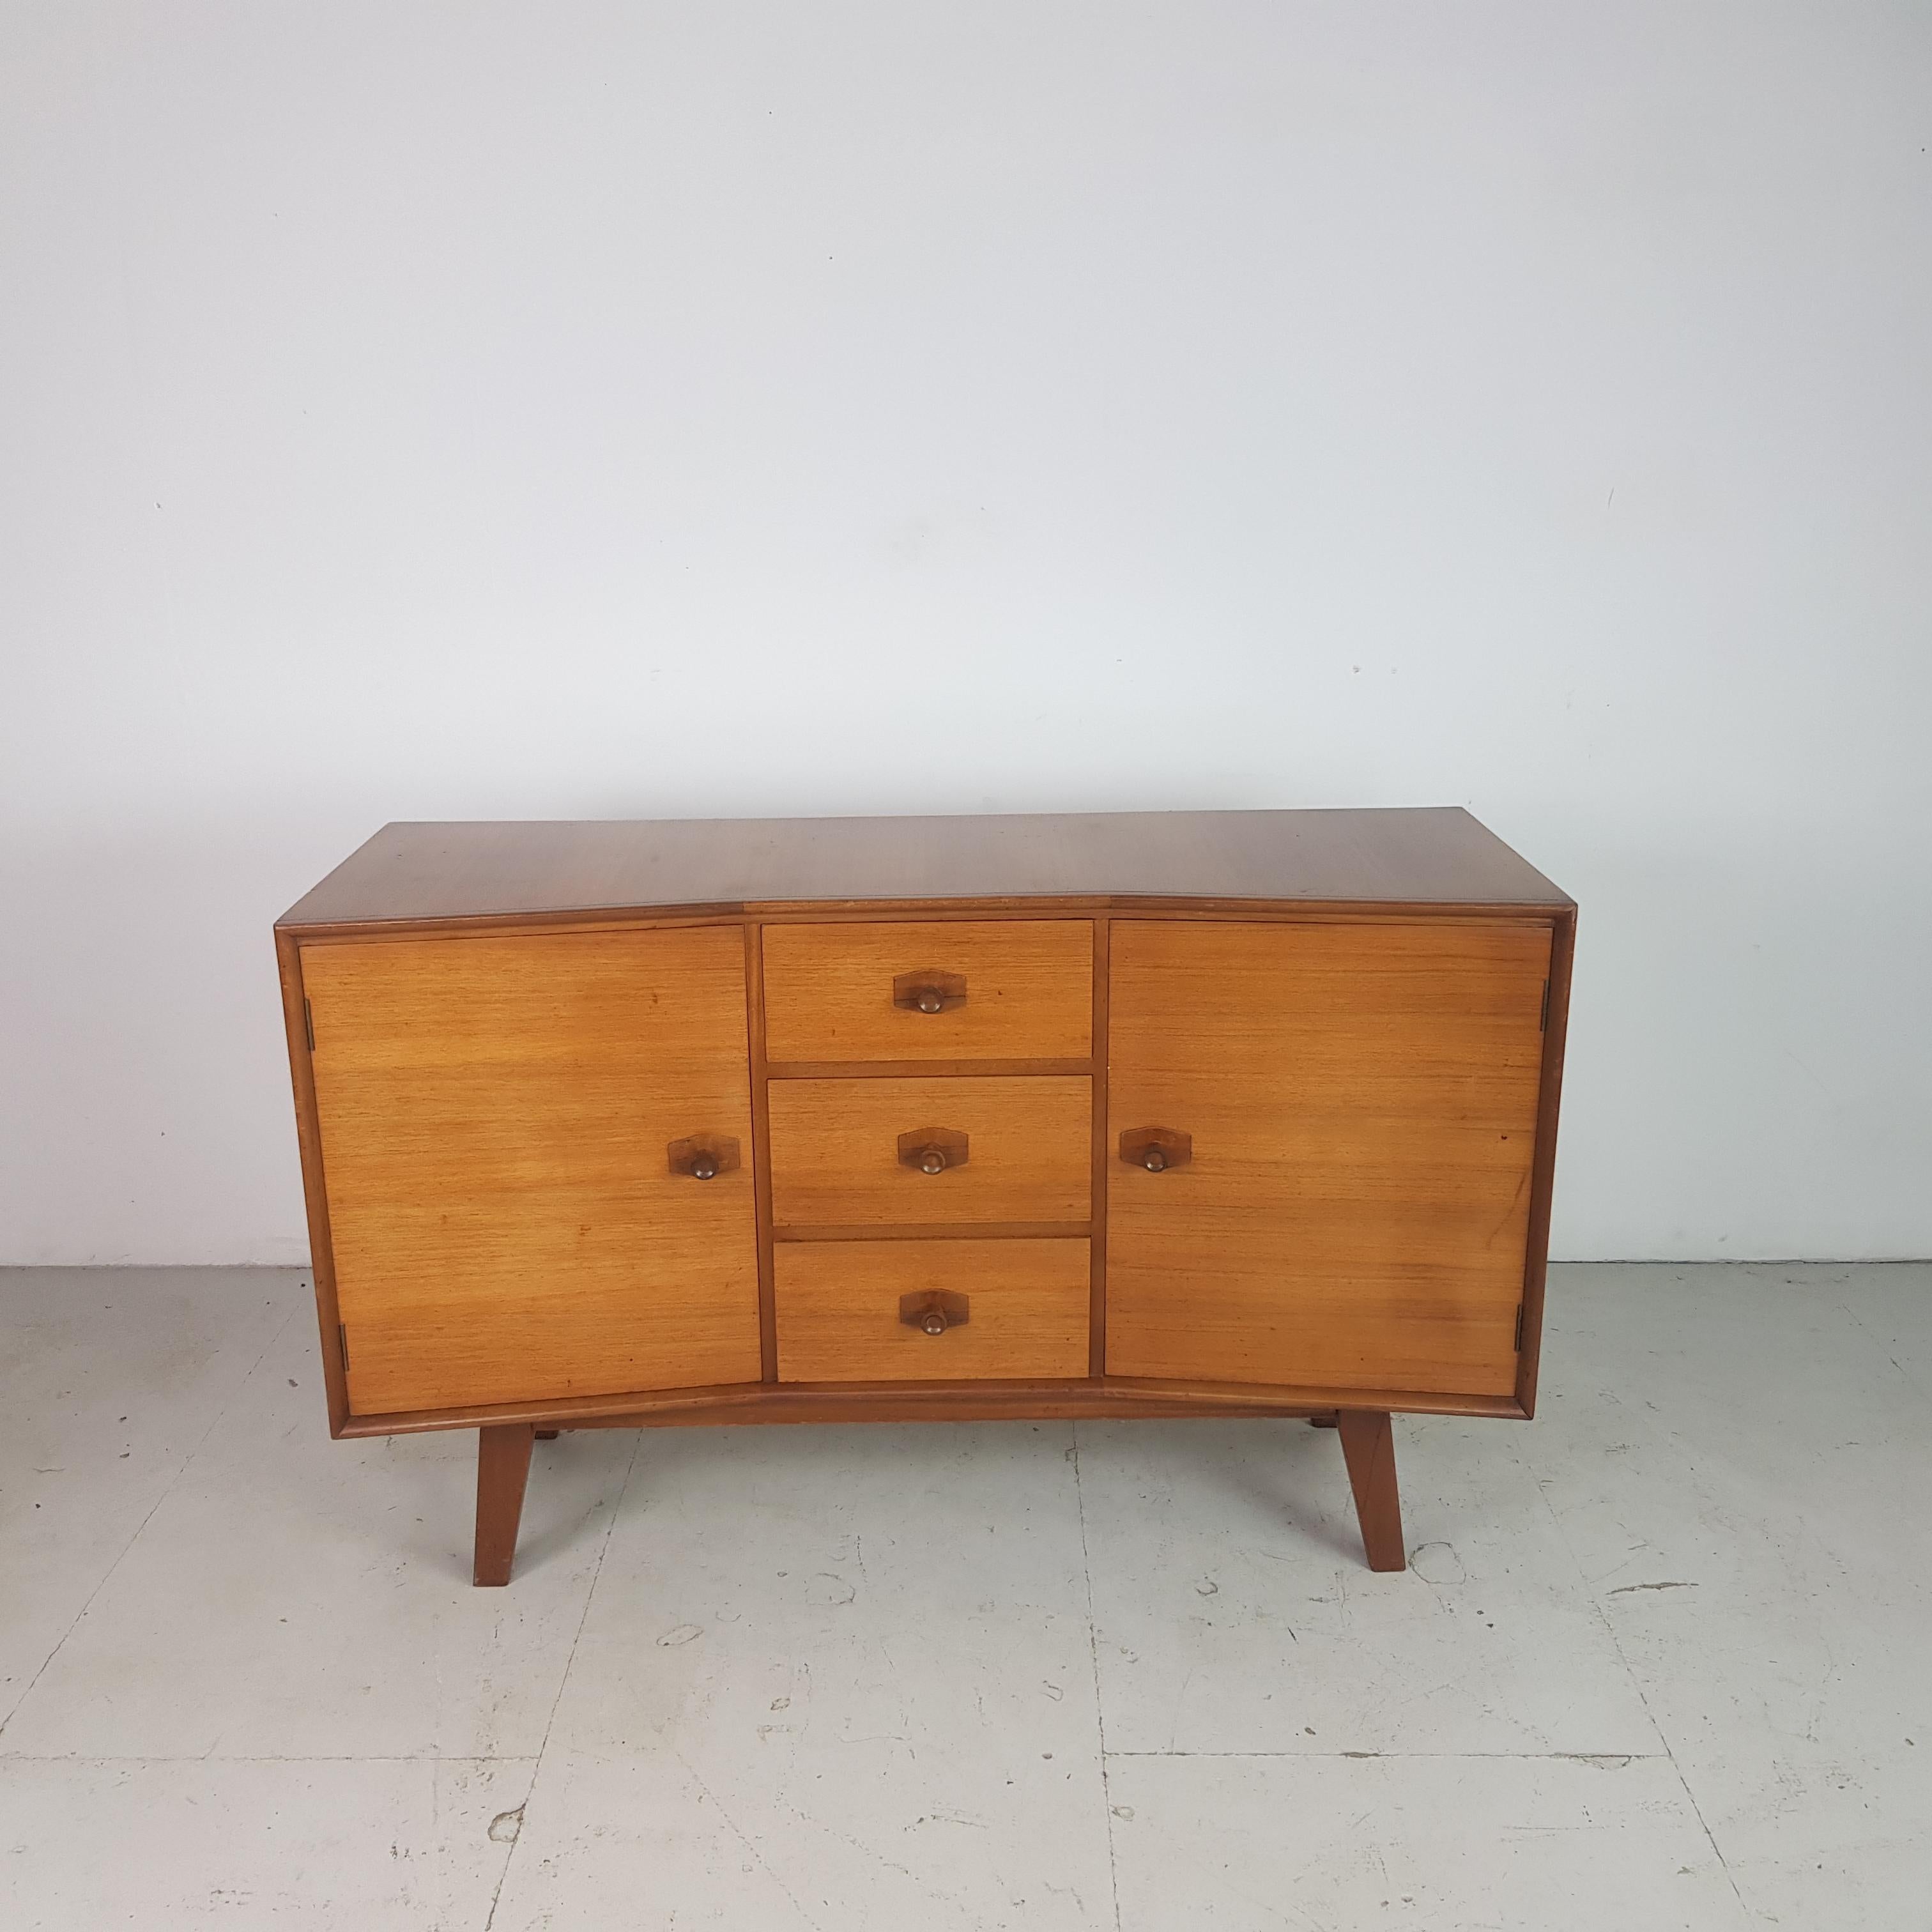 British Midcentury Small Teak Sideboard by Heals, 1950s For Sale